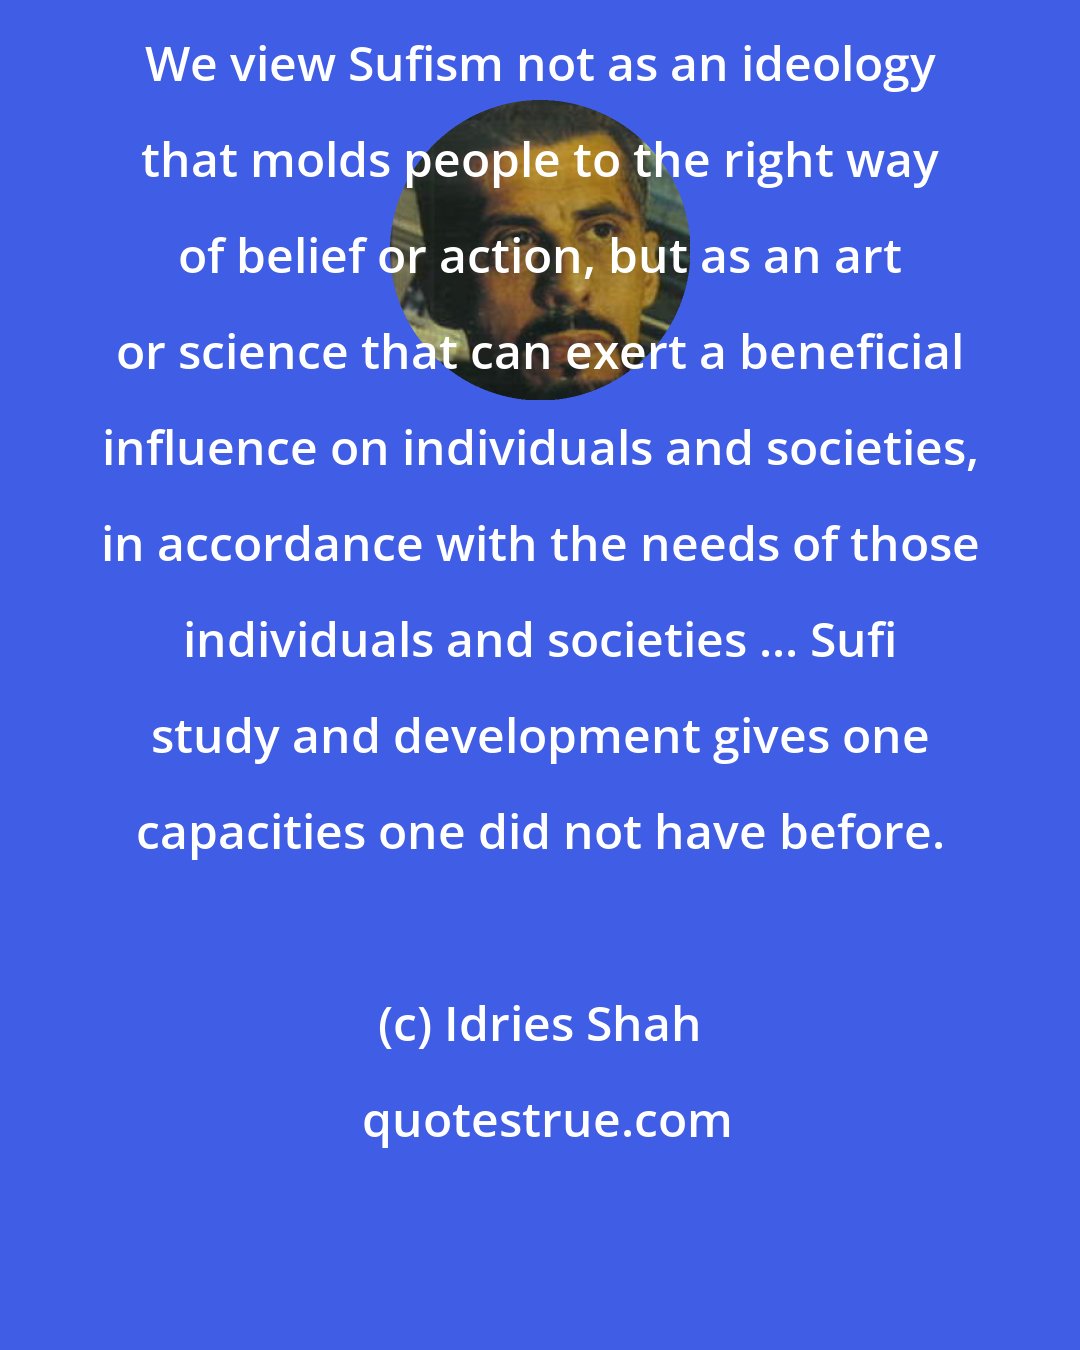 Idries Shah: We view Sufism not as an ideology that molds people to the right way of belief or action, but as an art or science that can exert a beneficial influence on individuals and societies, in accordance with the needs of those individuals and societies ... Sufi study and development gives one capacities one did not have before.